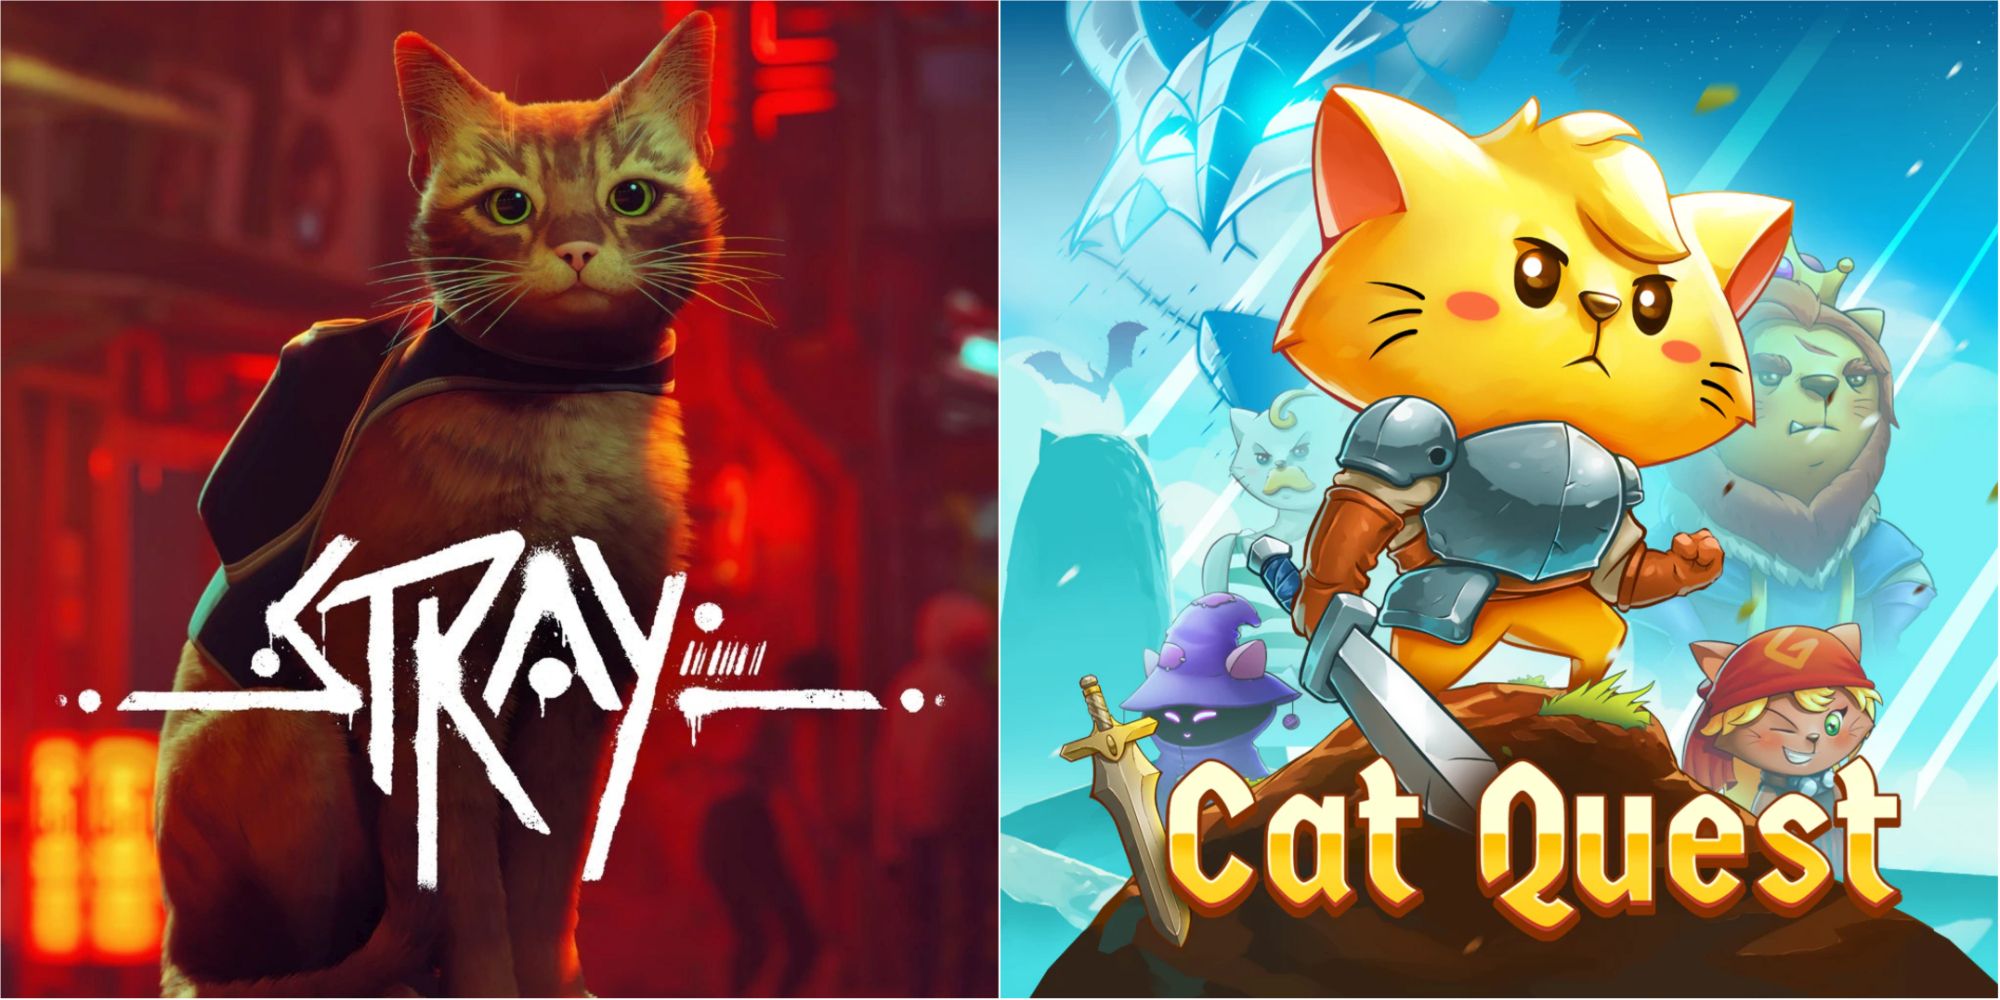 Promo posters from Stray and Cat Quest 